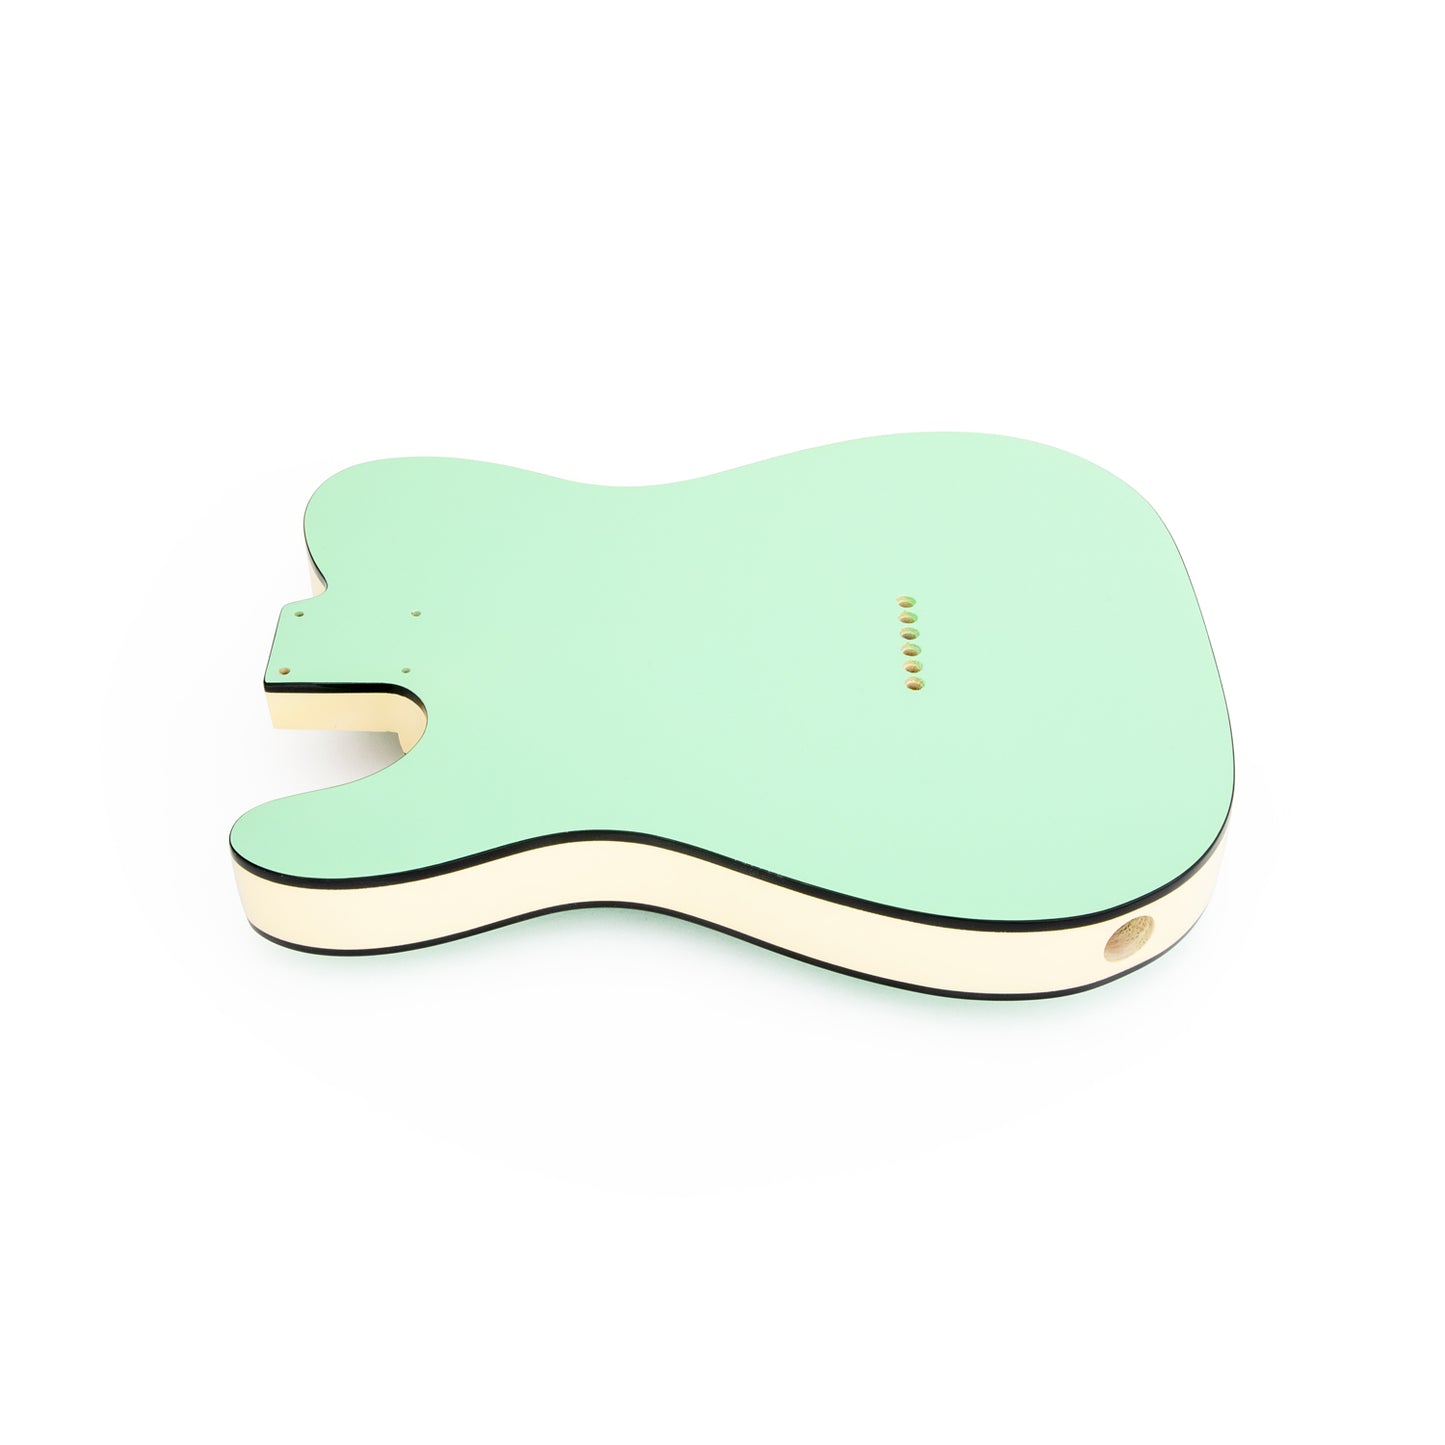 AE Guitars® T-Style Paulownia Guitar Body Seafoam Green and Vintage White Sides